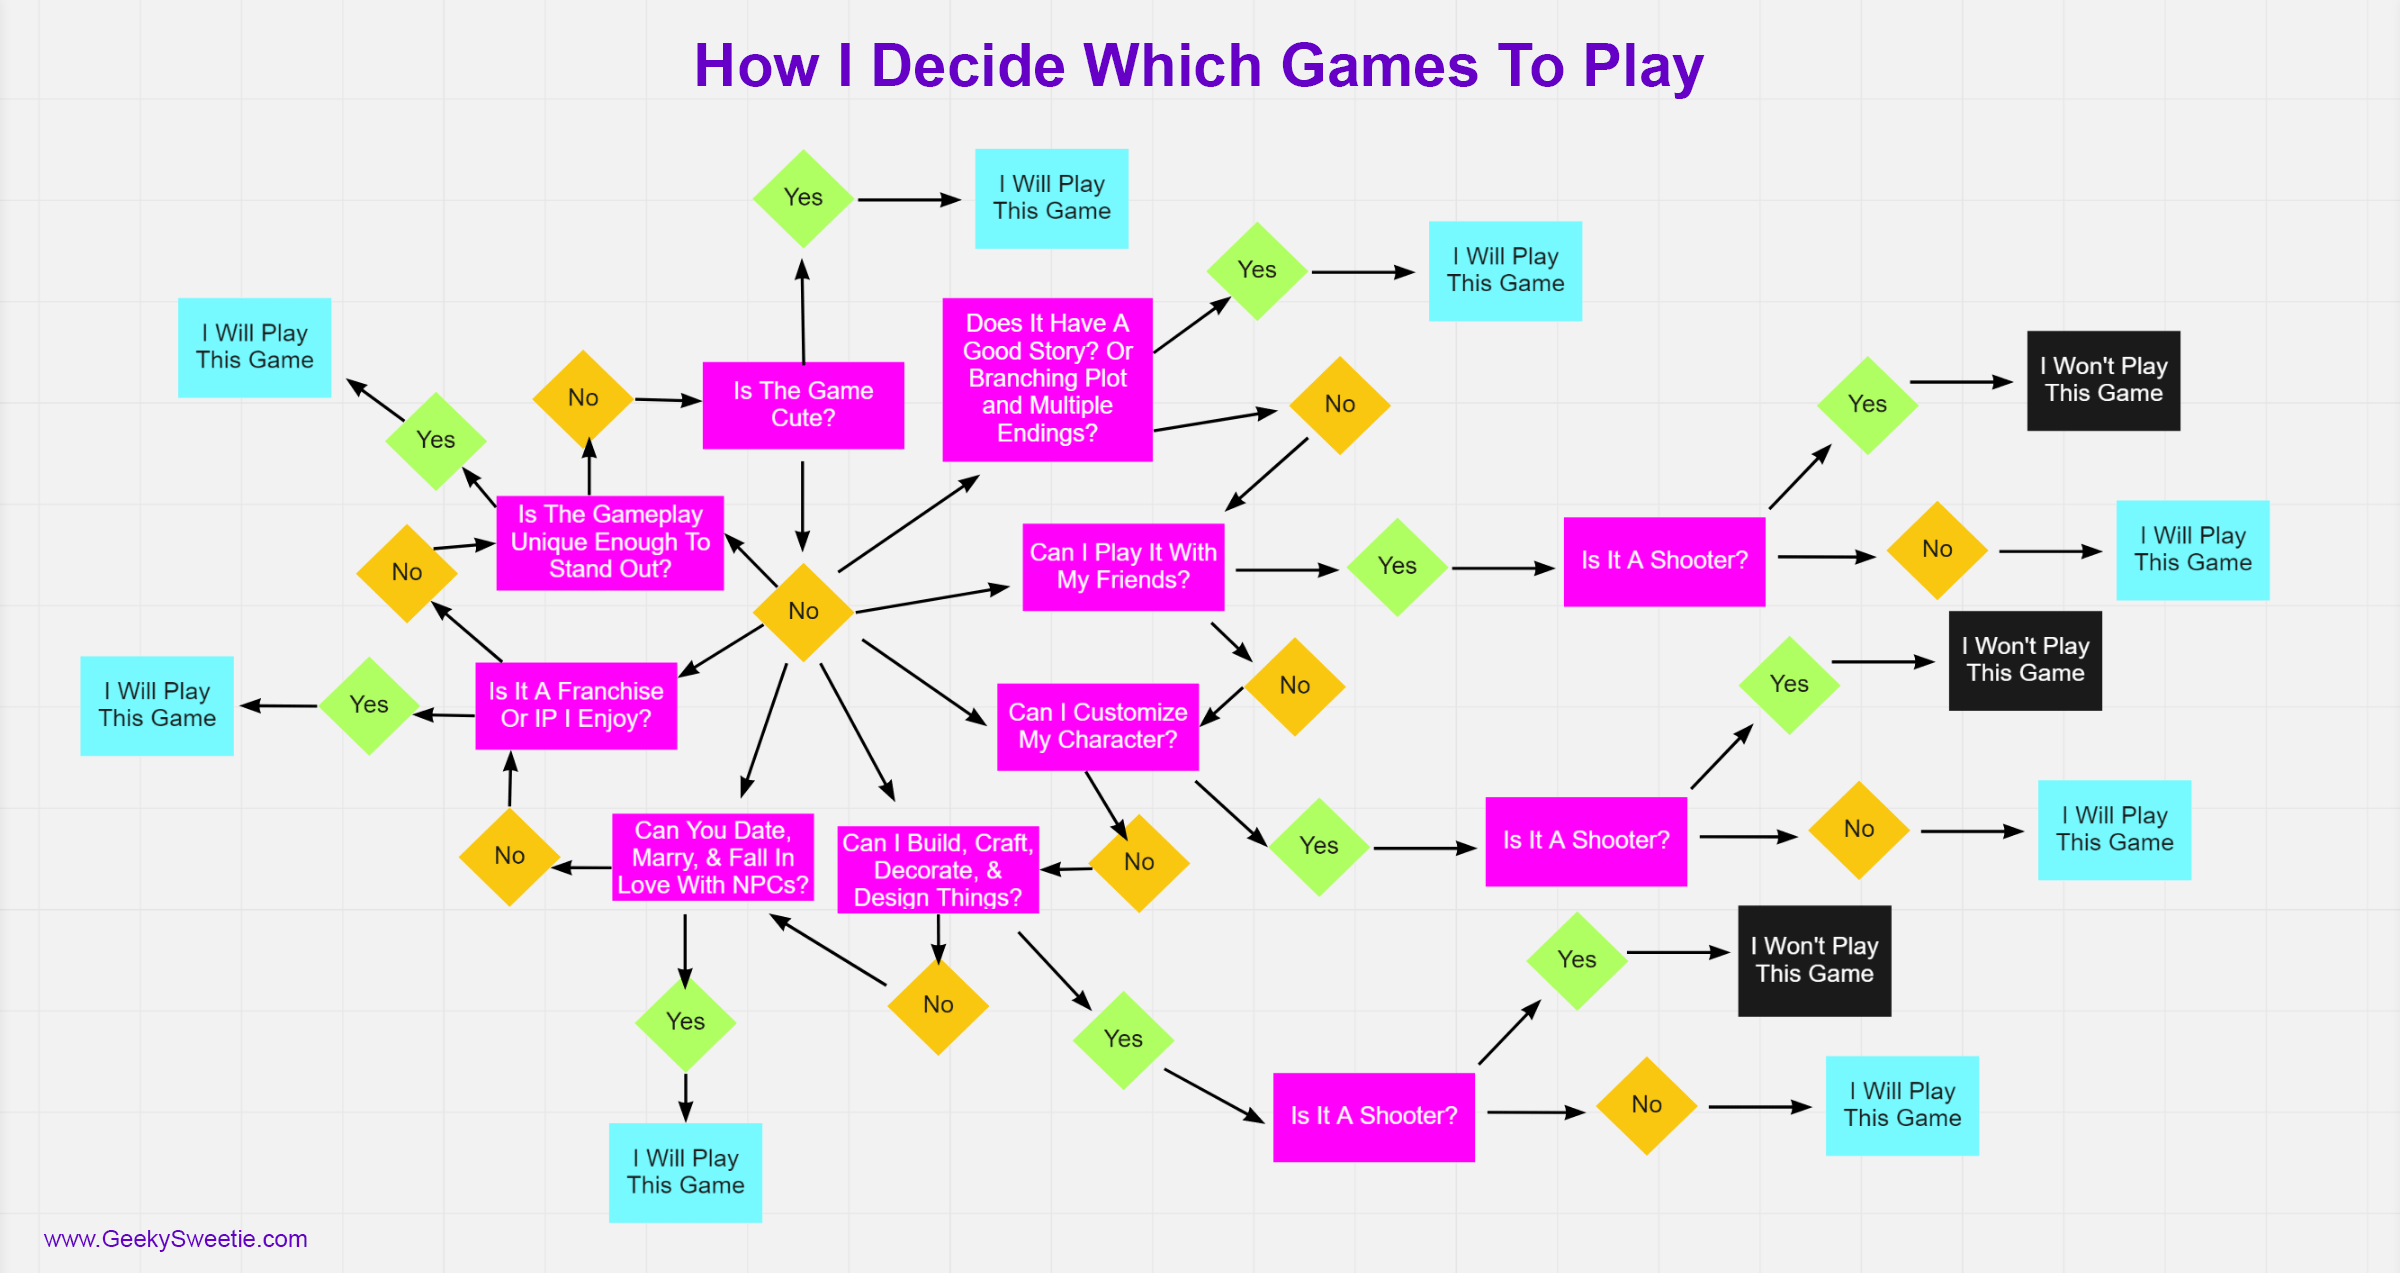 How I Decide Which Games To Play